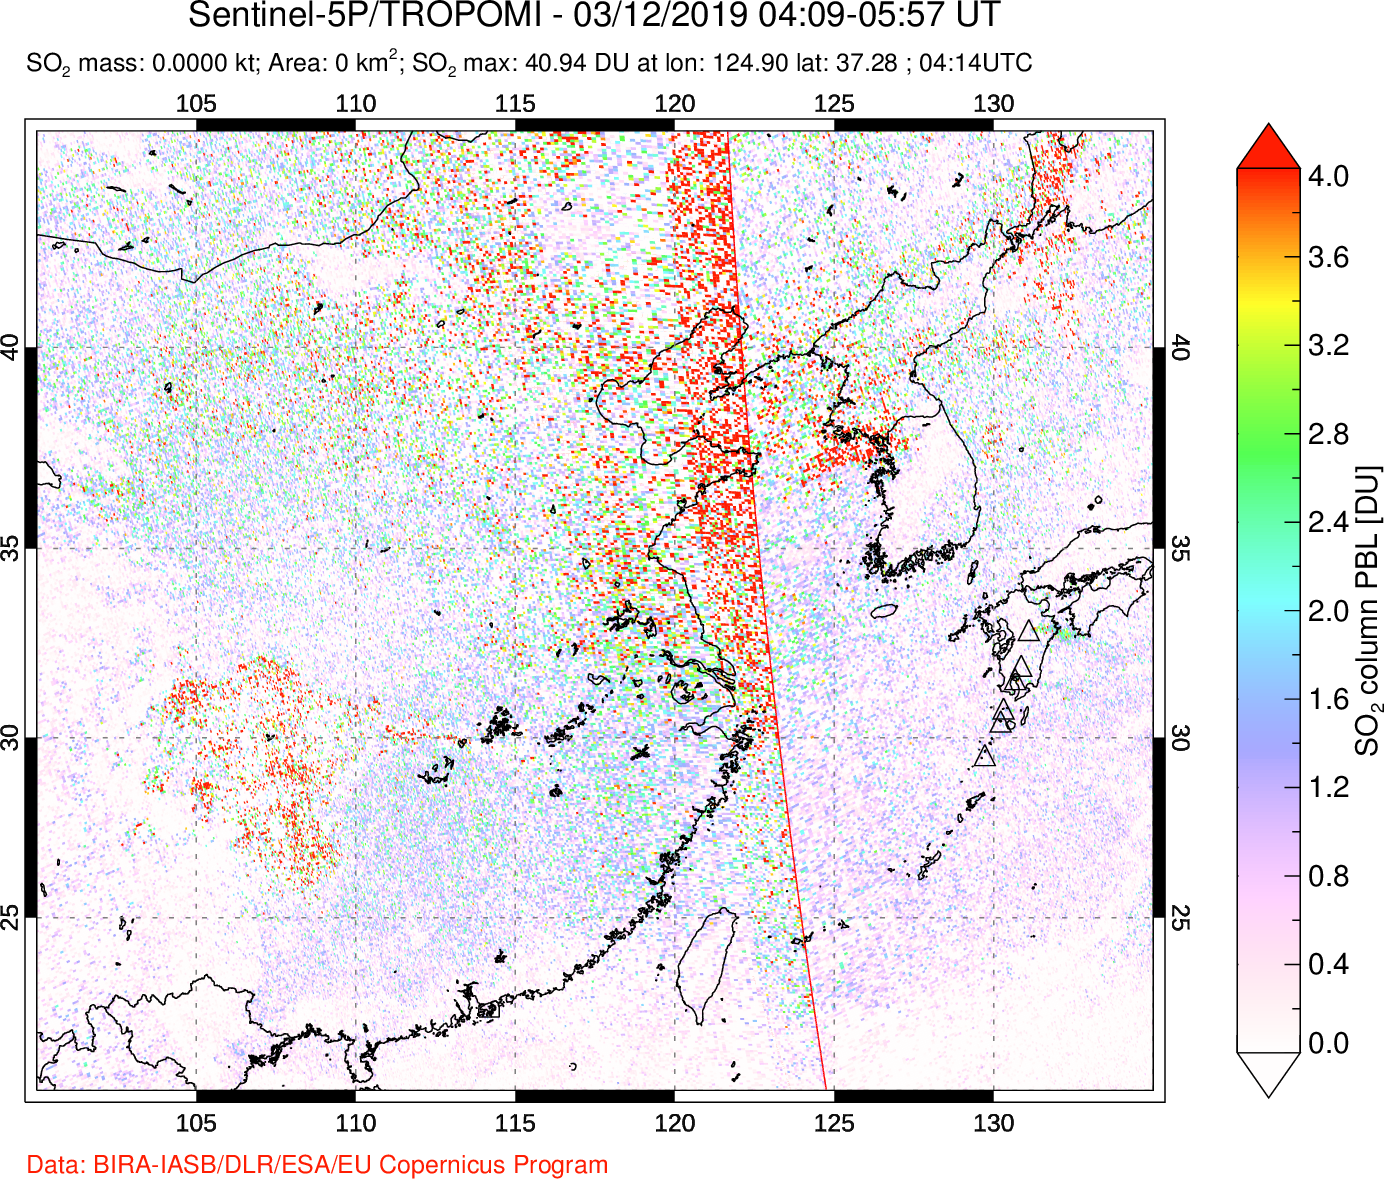 A sulfur dioxide image over Eastern China on Mar 12, 2019.